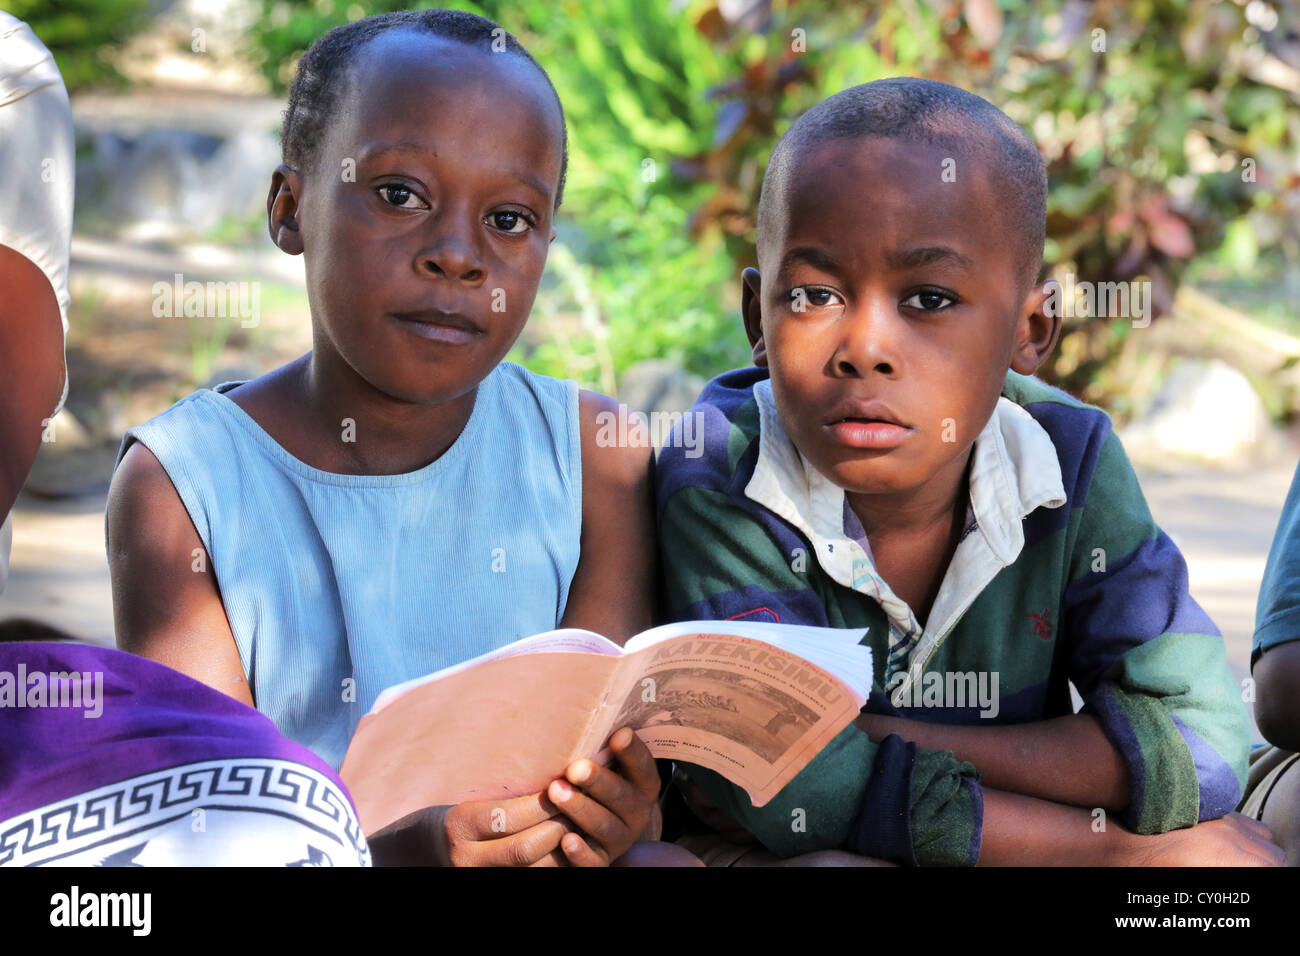 Pupils during the catholic religious education read in a catechesis book. Bagamoyo, Tansania Stock Photo